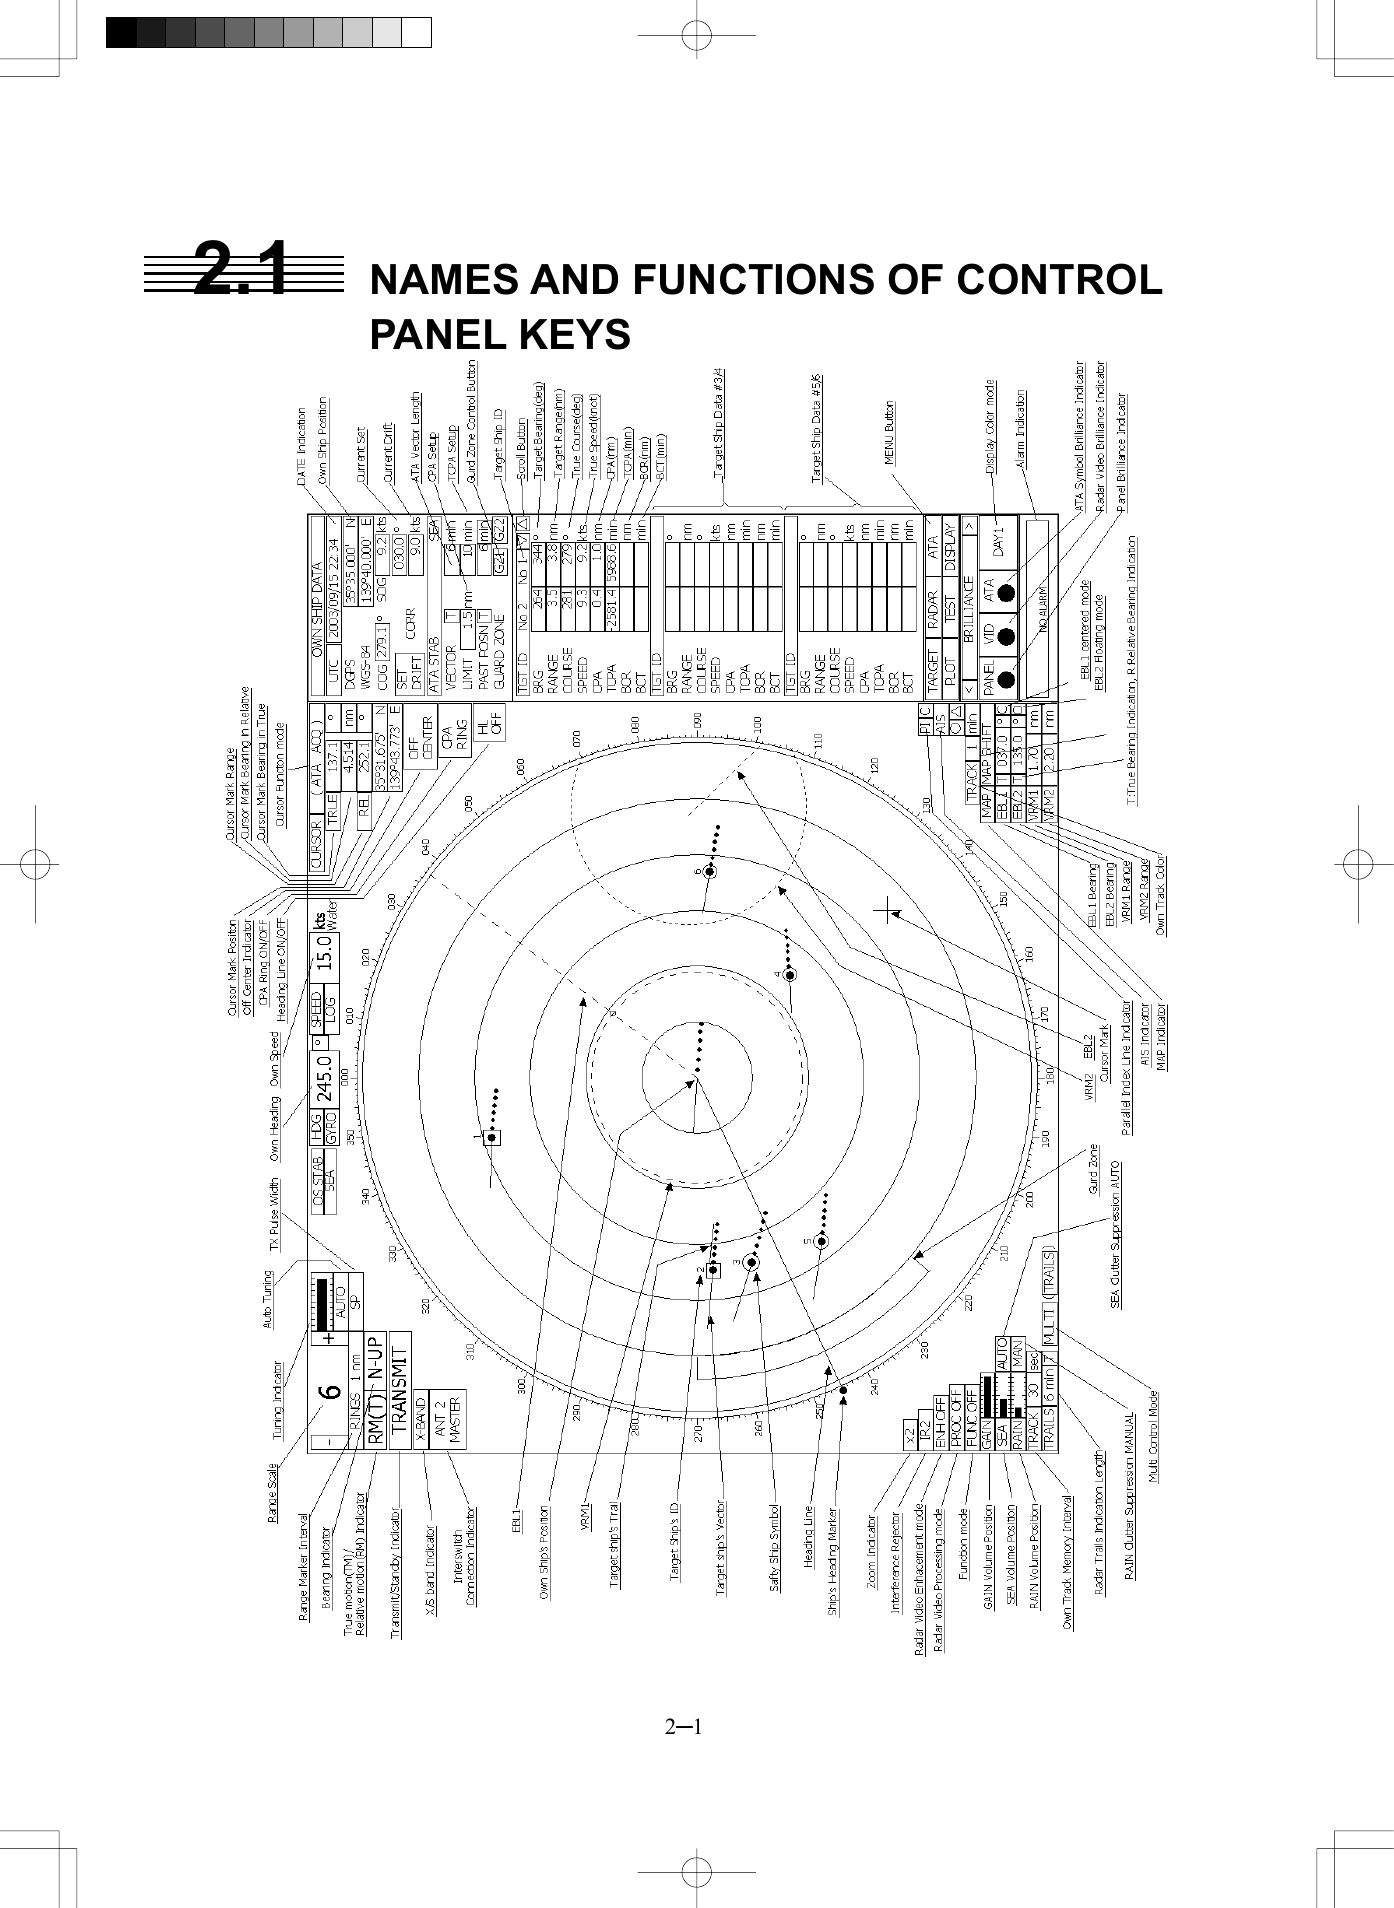  2─1 2.1  NAMES AND FUNCTIONS OF CONTROL PANEL KEYS  Example of Display    